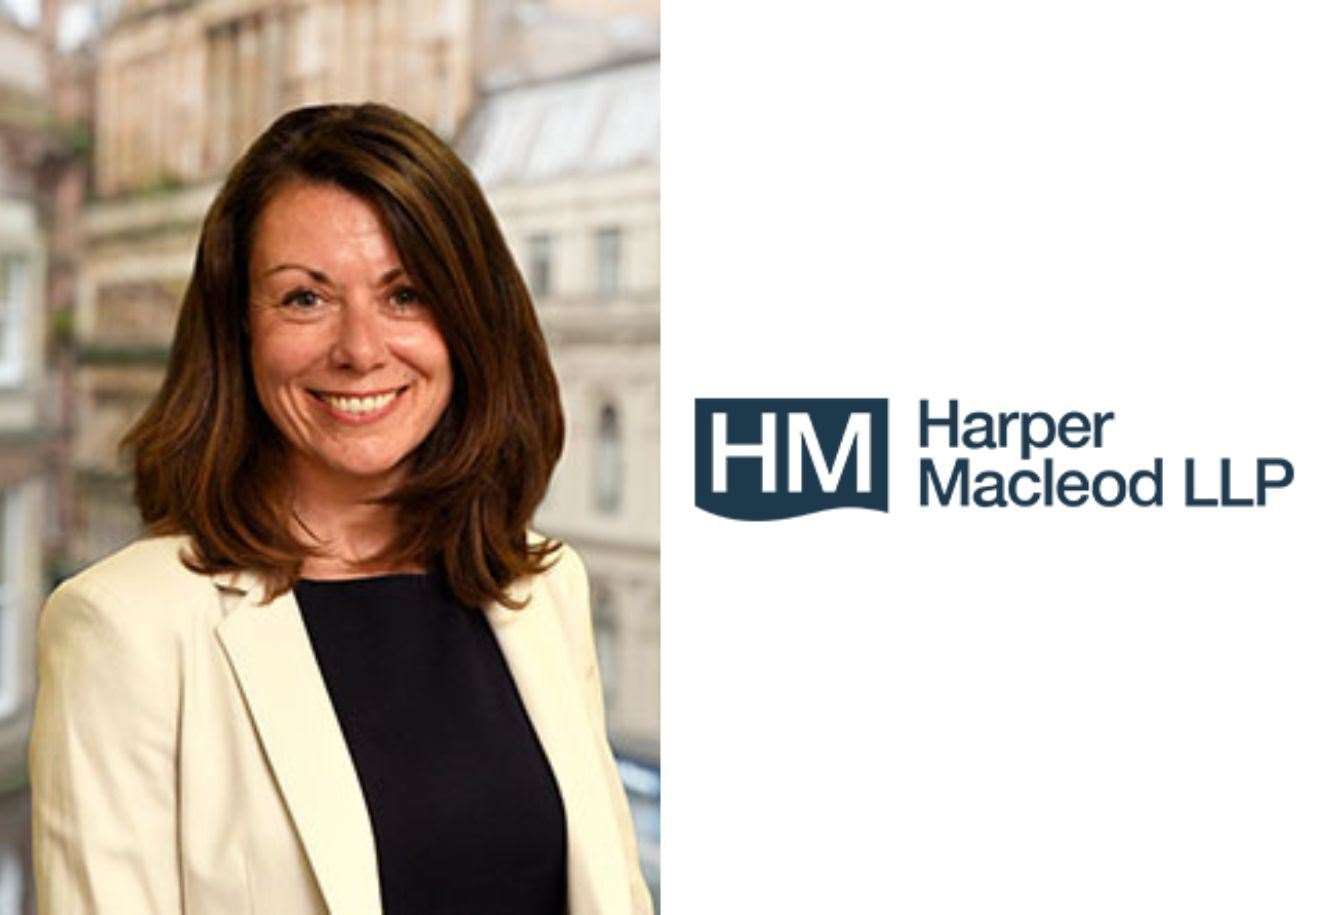 Julie Doncaster is a partner in the private client team at Harper Macleod